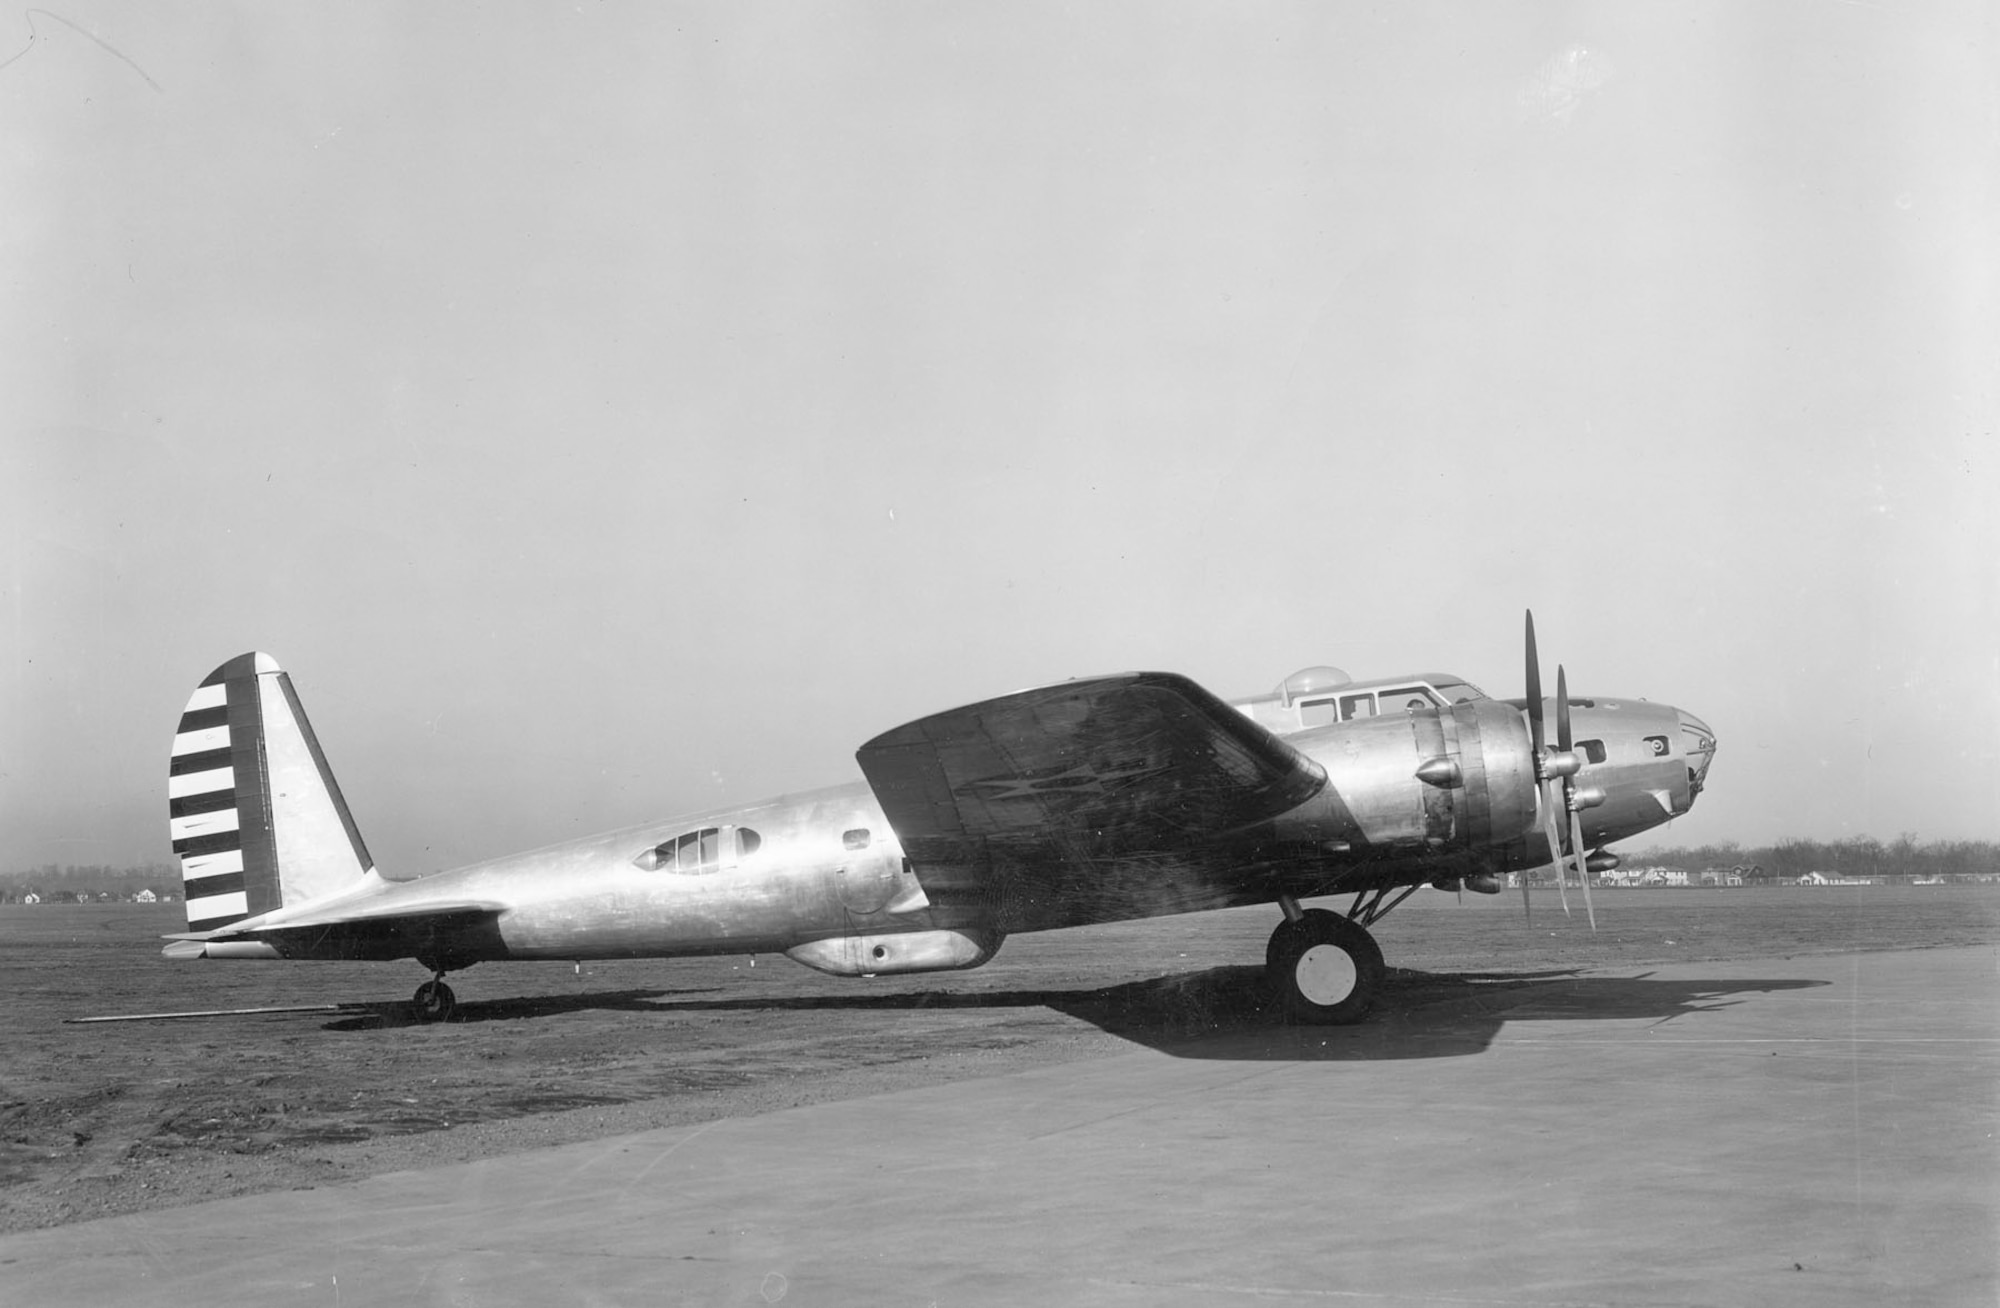 Early B-17D at Wright Field. The "D" model was the last B-17 series to have a small "shark-fin" tail and underside "bathtub" gun position. (U.S. Air Force photo)